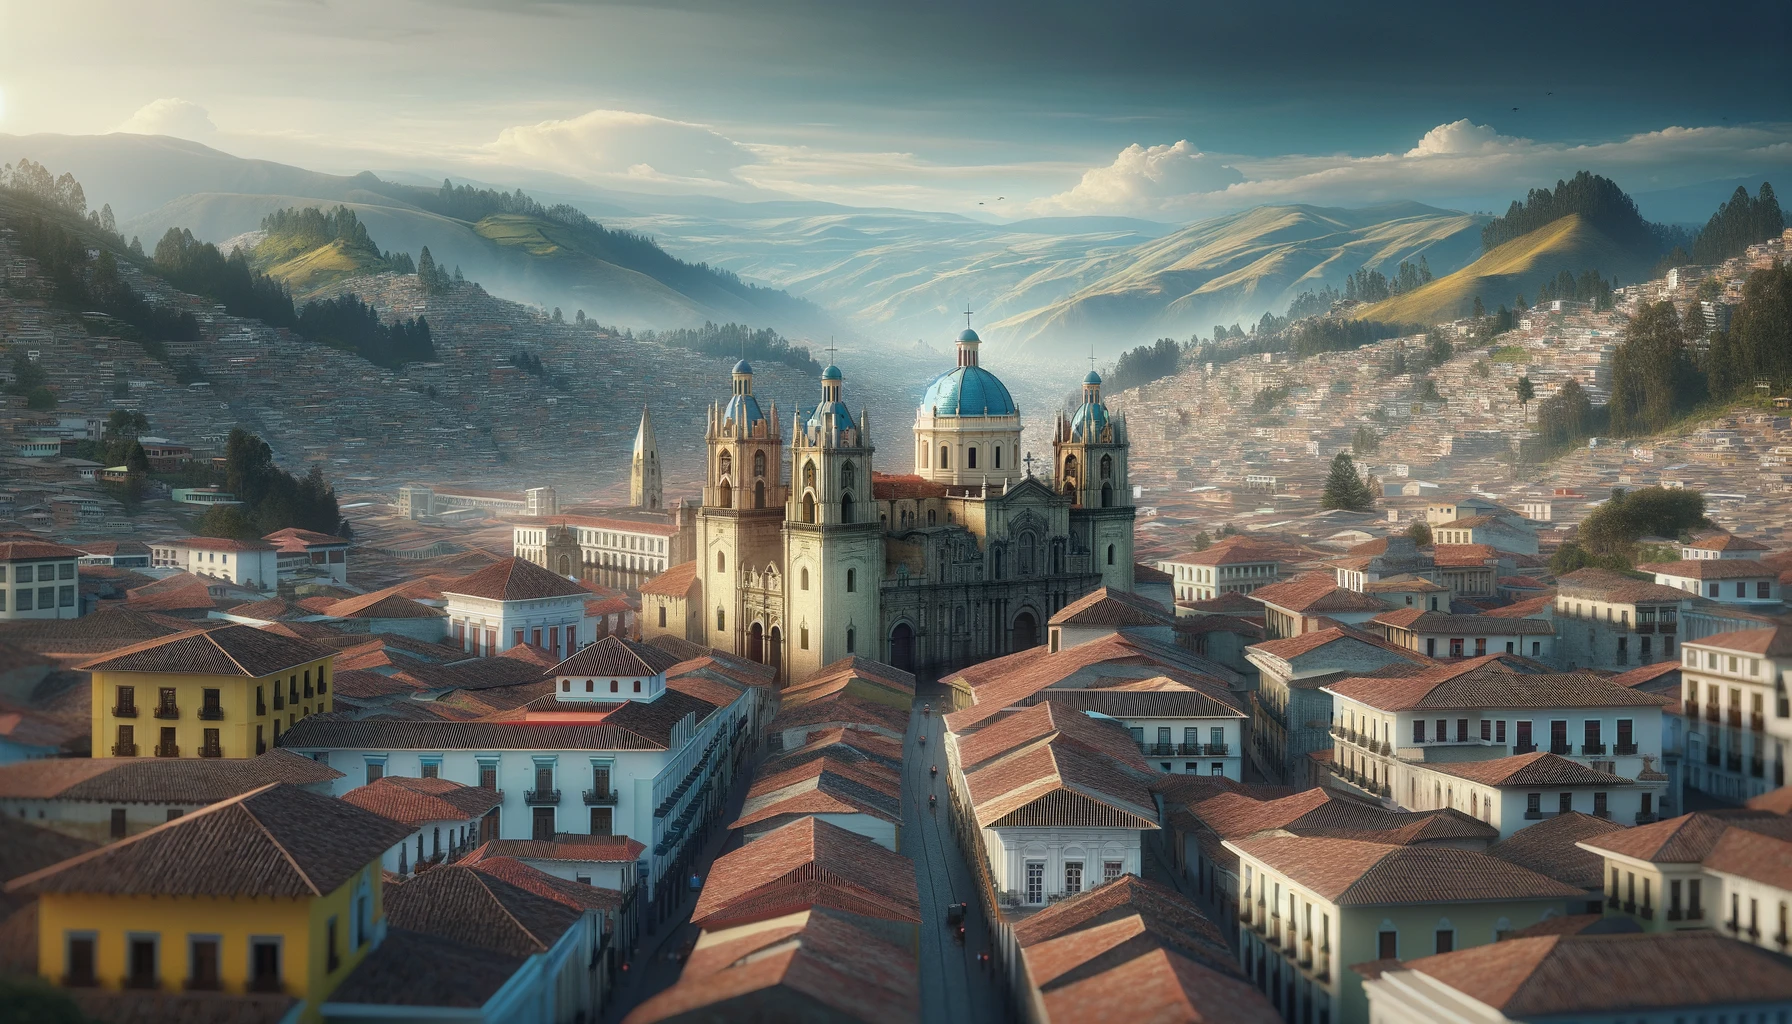 <p>Cuenca is another Ecuadorian gem, famous for its colonial architecture and vibrant arts scene. The city is a UNESCO World Heritage site and offers a high quality of life at a very affordable cost. It’s a favorite among expats looking for a blend of culture, history, and affordability.</p>